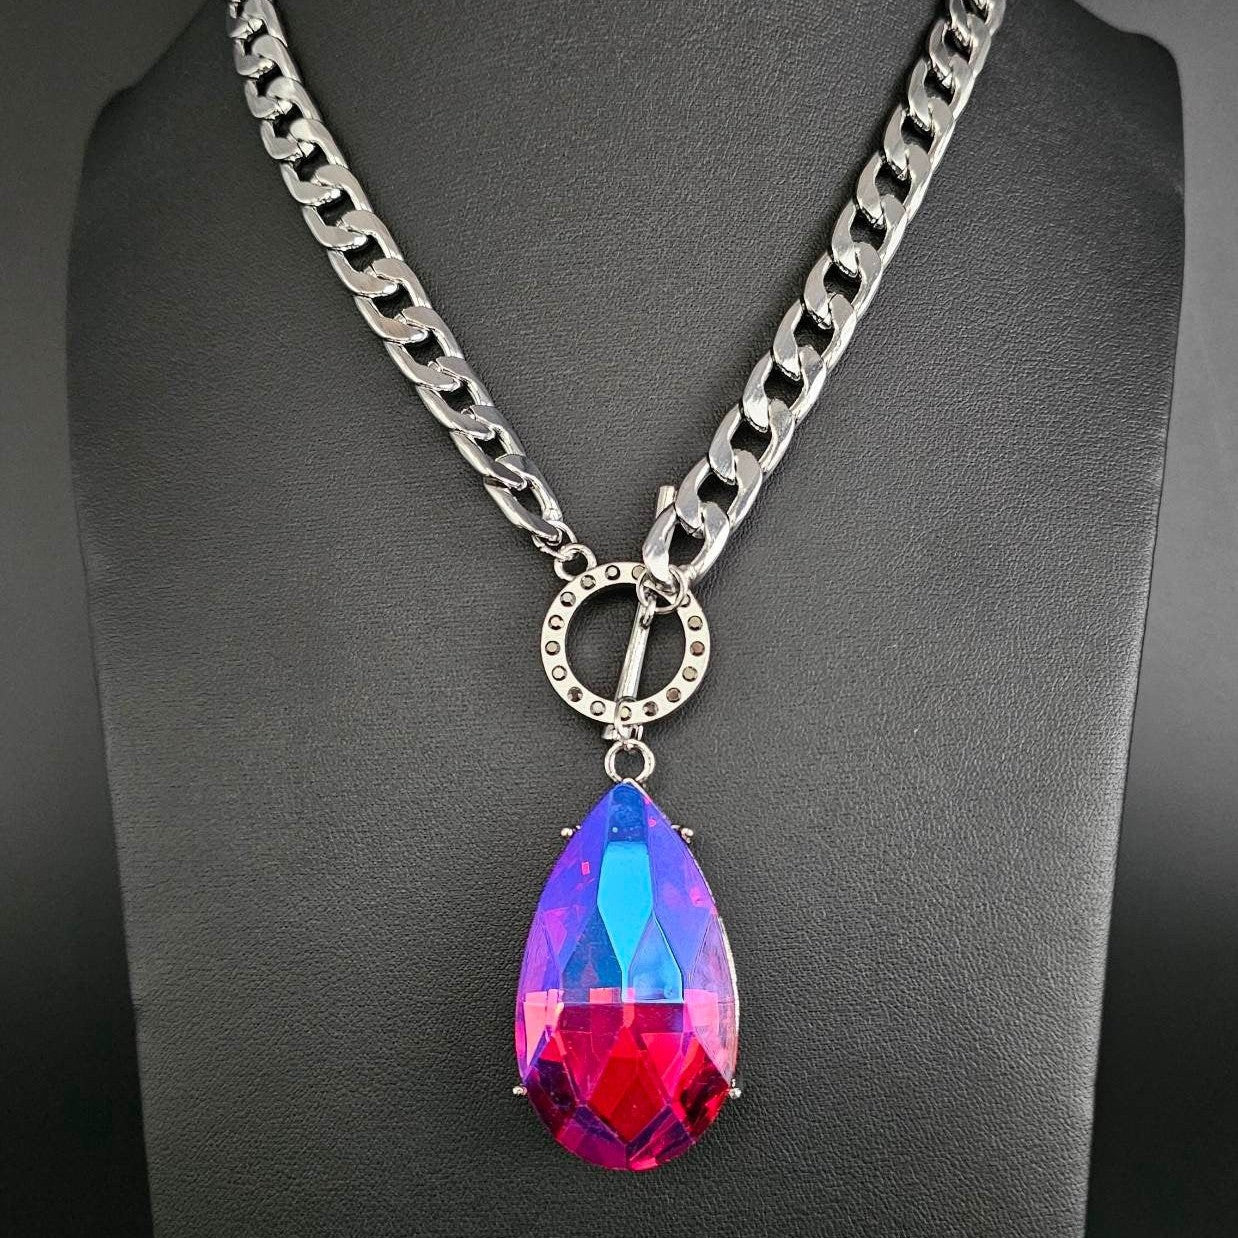 Edgy Exaggeration Pink Necklace - Bling by Danielle Baker